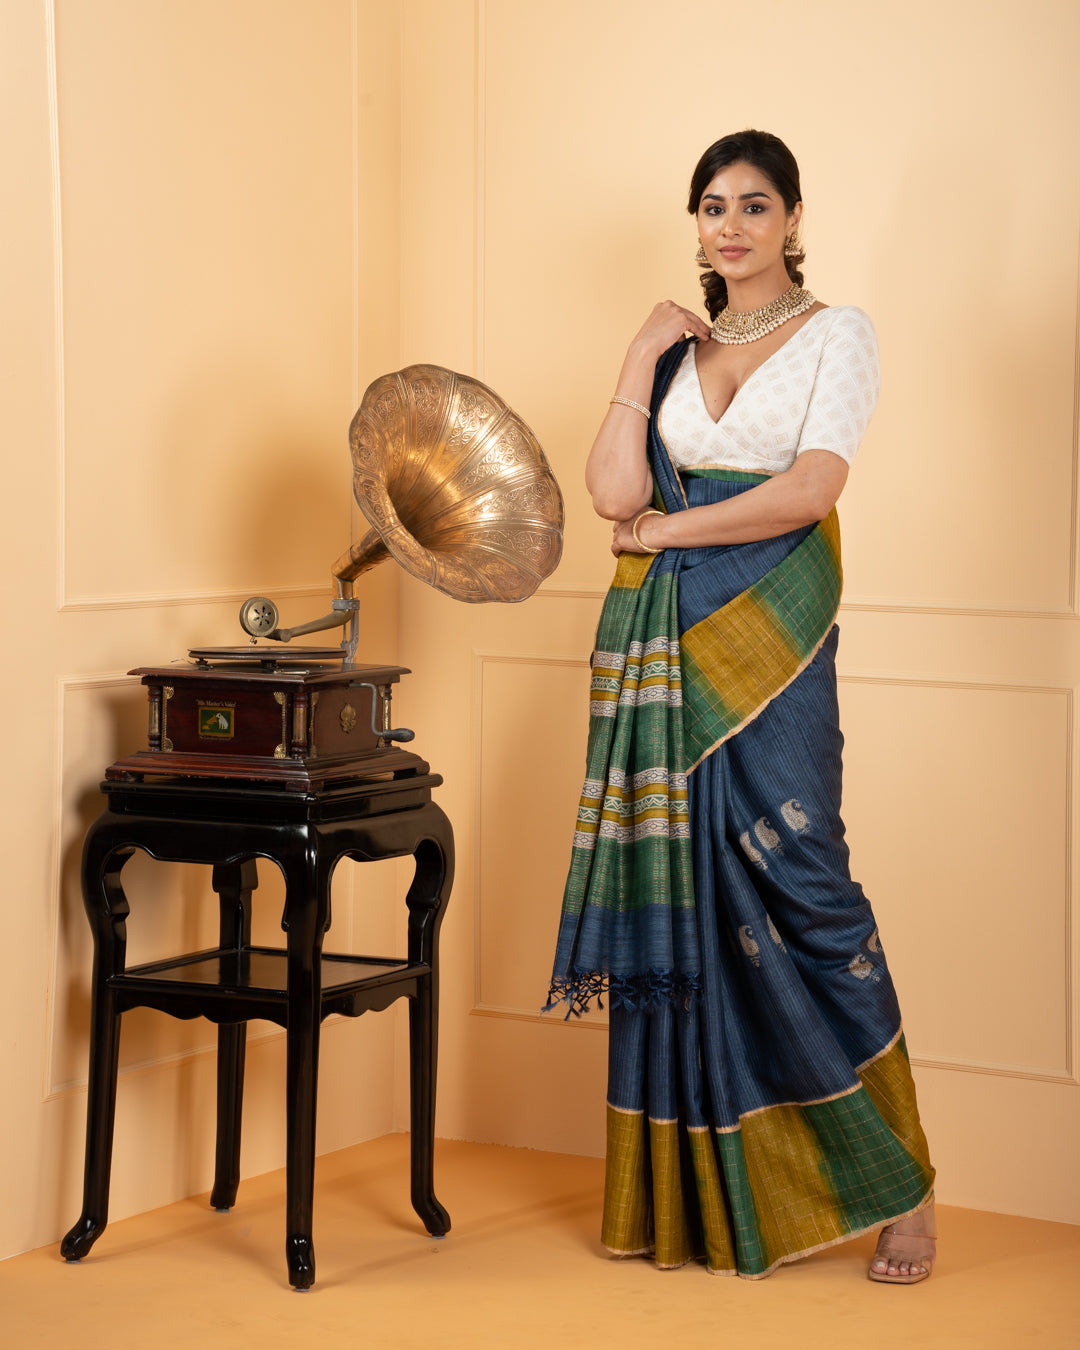 Where can I get Tussar Silks saree? And what is Tussar Silk? - Quora